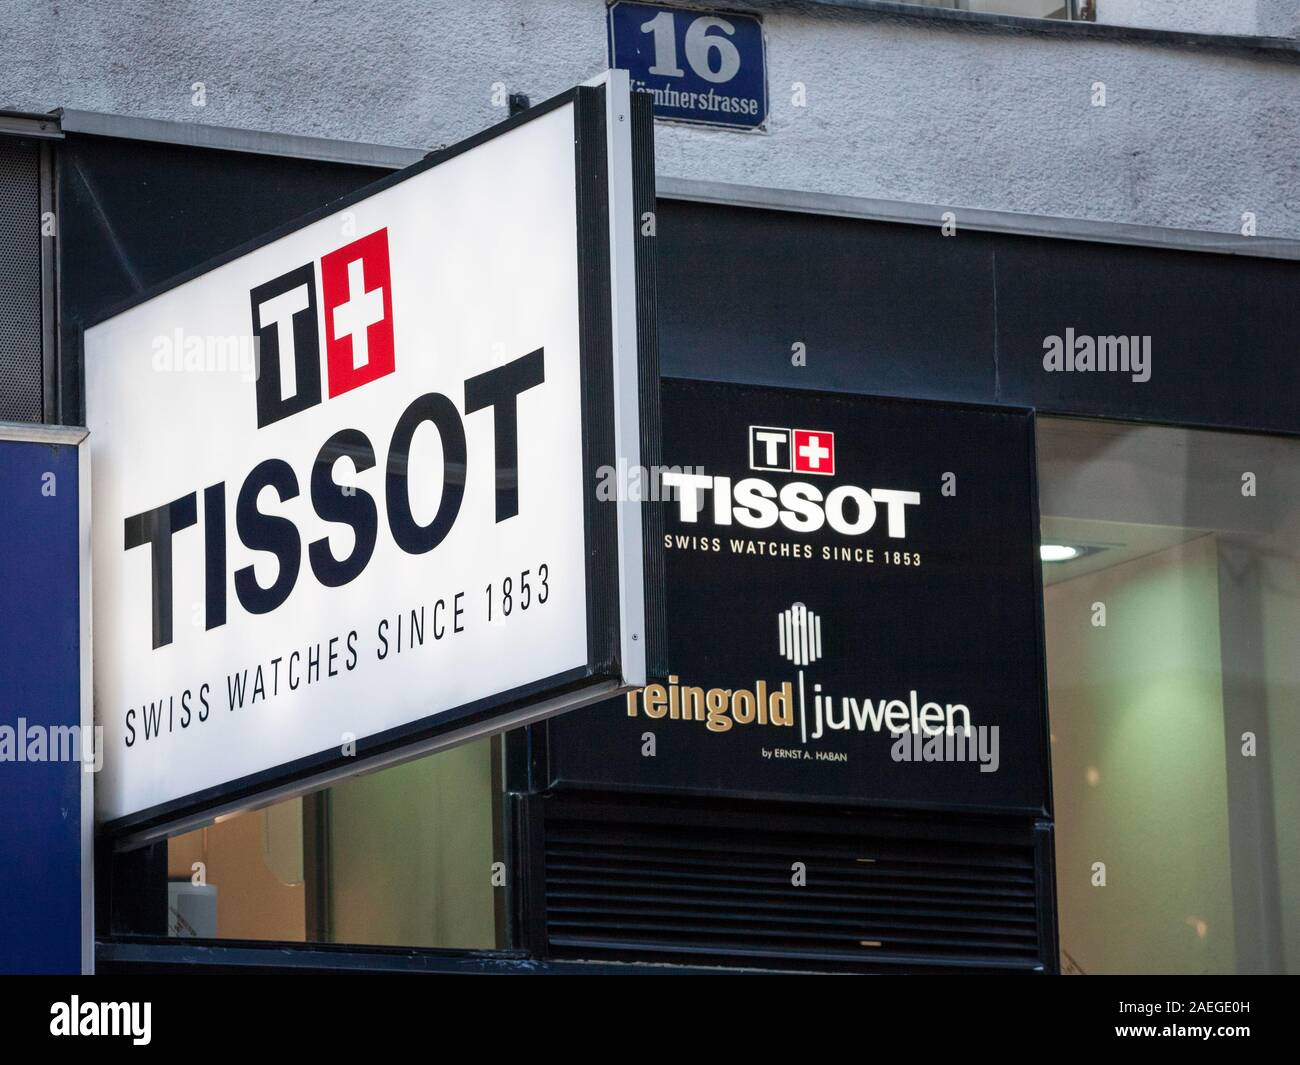 VIENNA, AUSTRIA - NOVEMBER 6, 2019: Tissot logo on their jewelry boutique in Vienna. Tissot is a Swiss luxury watchmaker famous for chronographs and w Stock Photo